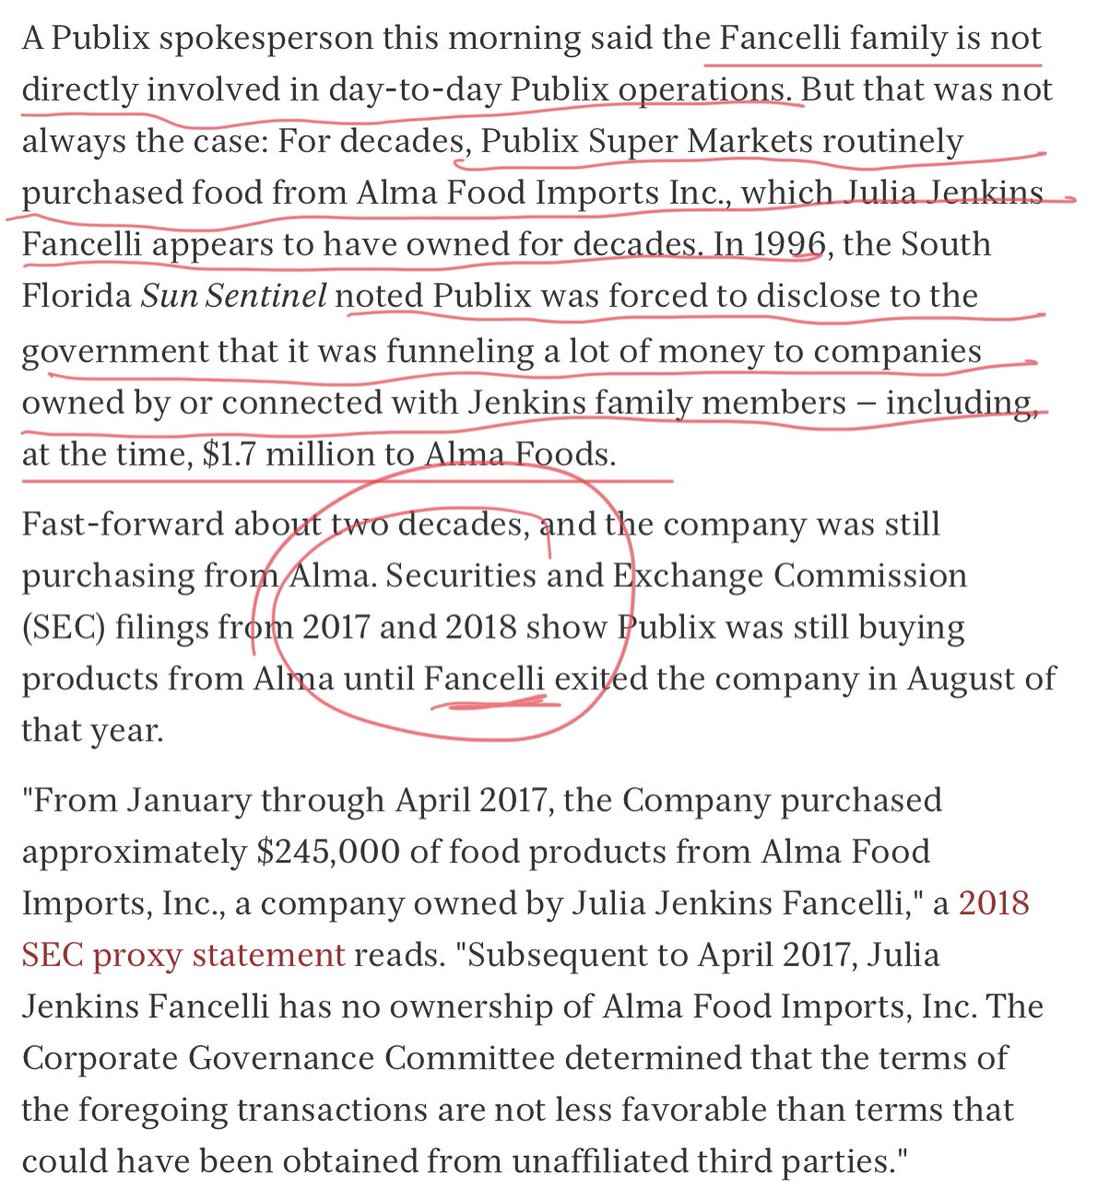 And Julie, seems to have had a great business importing products from her husbands business in Italy to PUBLIX. Getting caught by the SEC after several decades, finally gave Julie the opportunity to step away from the company in 2018.11/